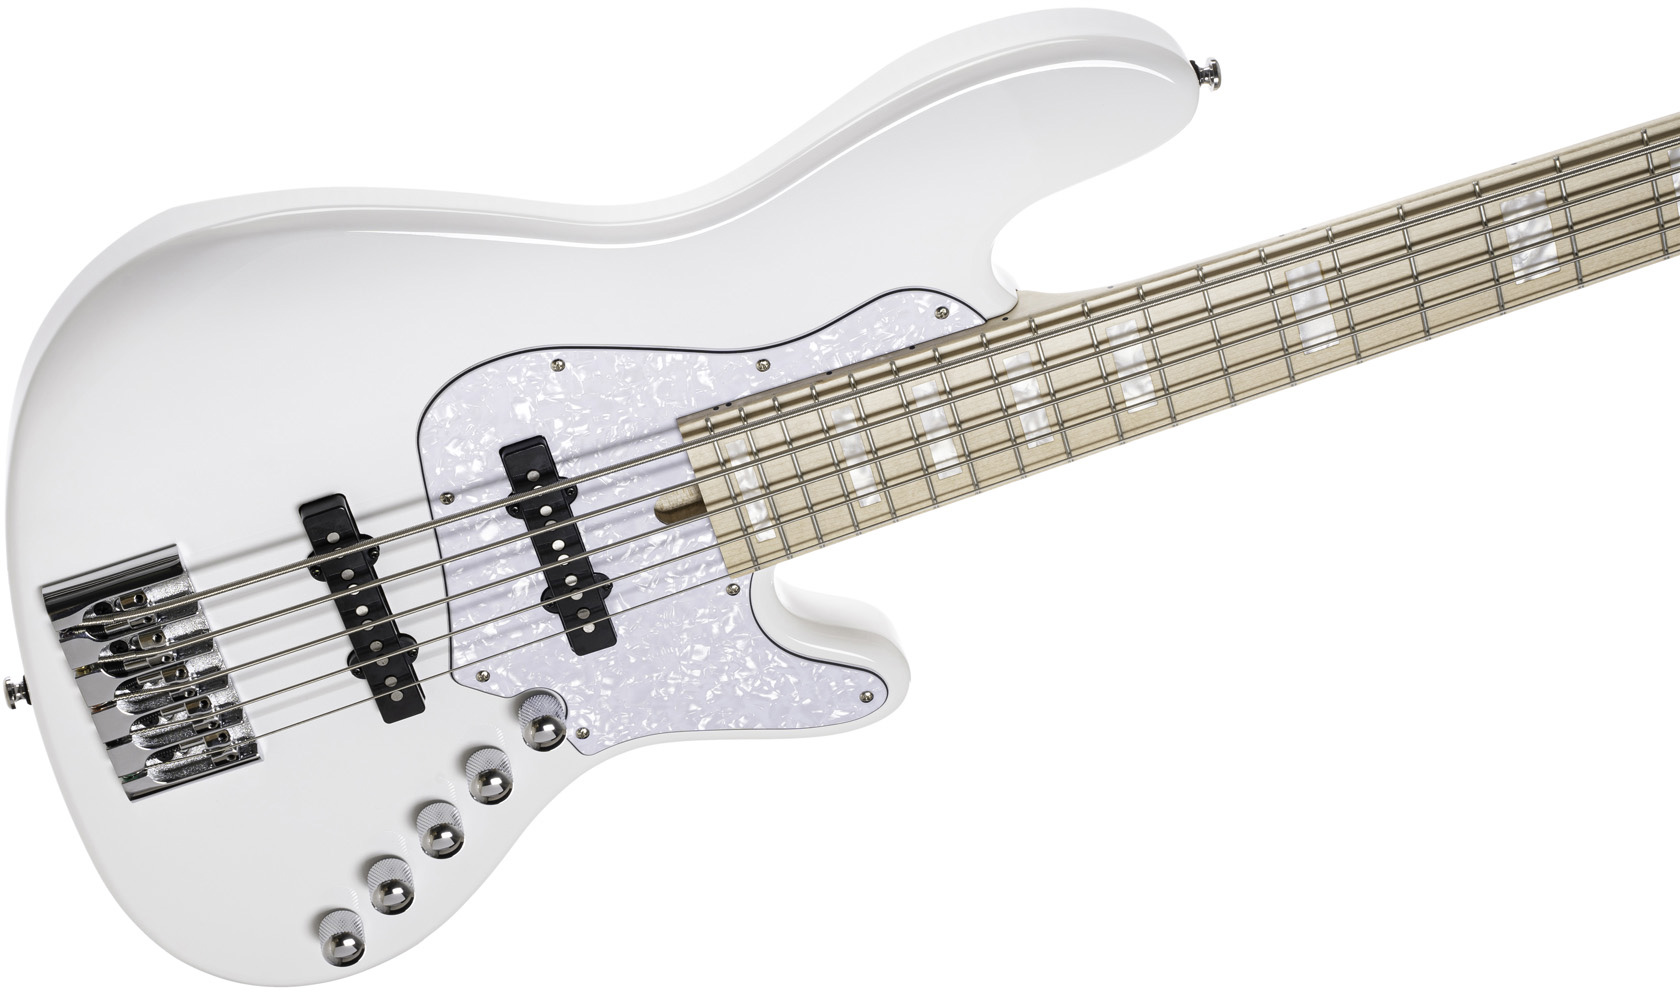 Cort Elrick Njs 5c Active Bartolini Mn - White - Solid body electric bass - Variation 2